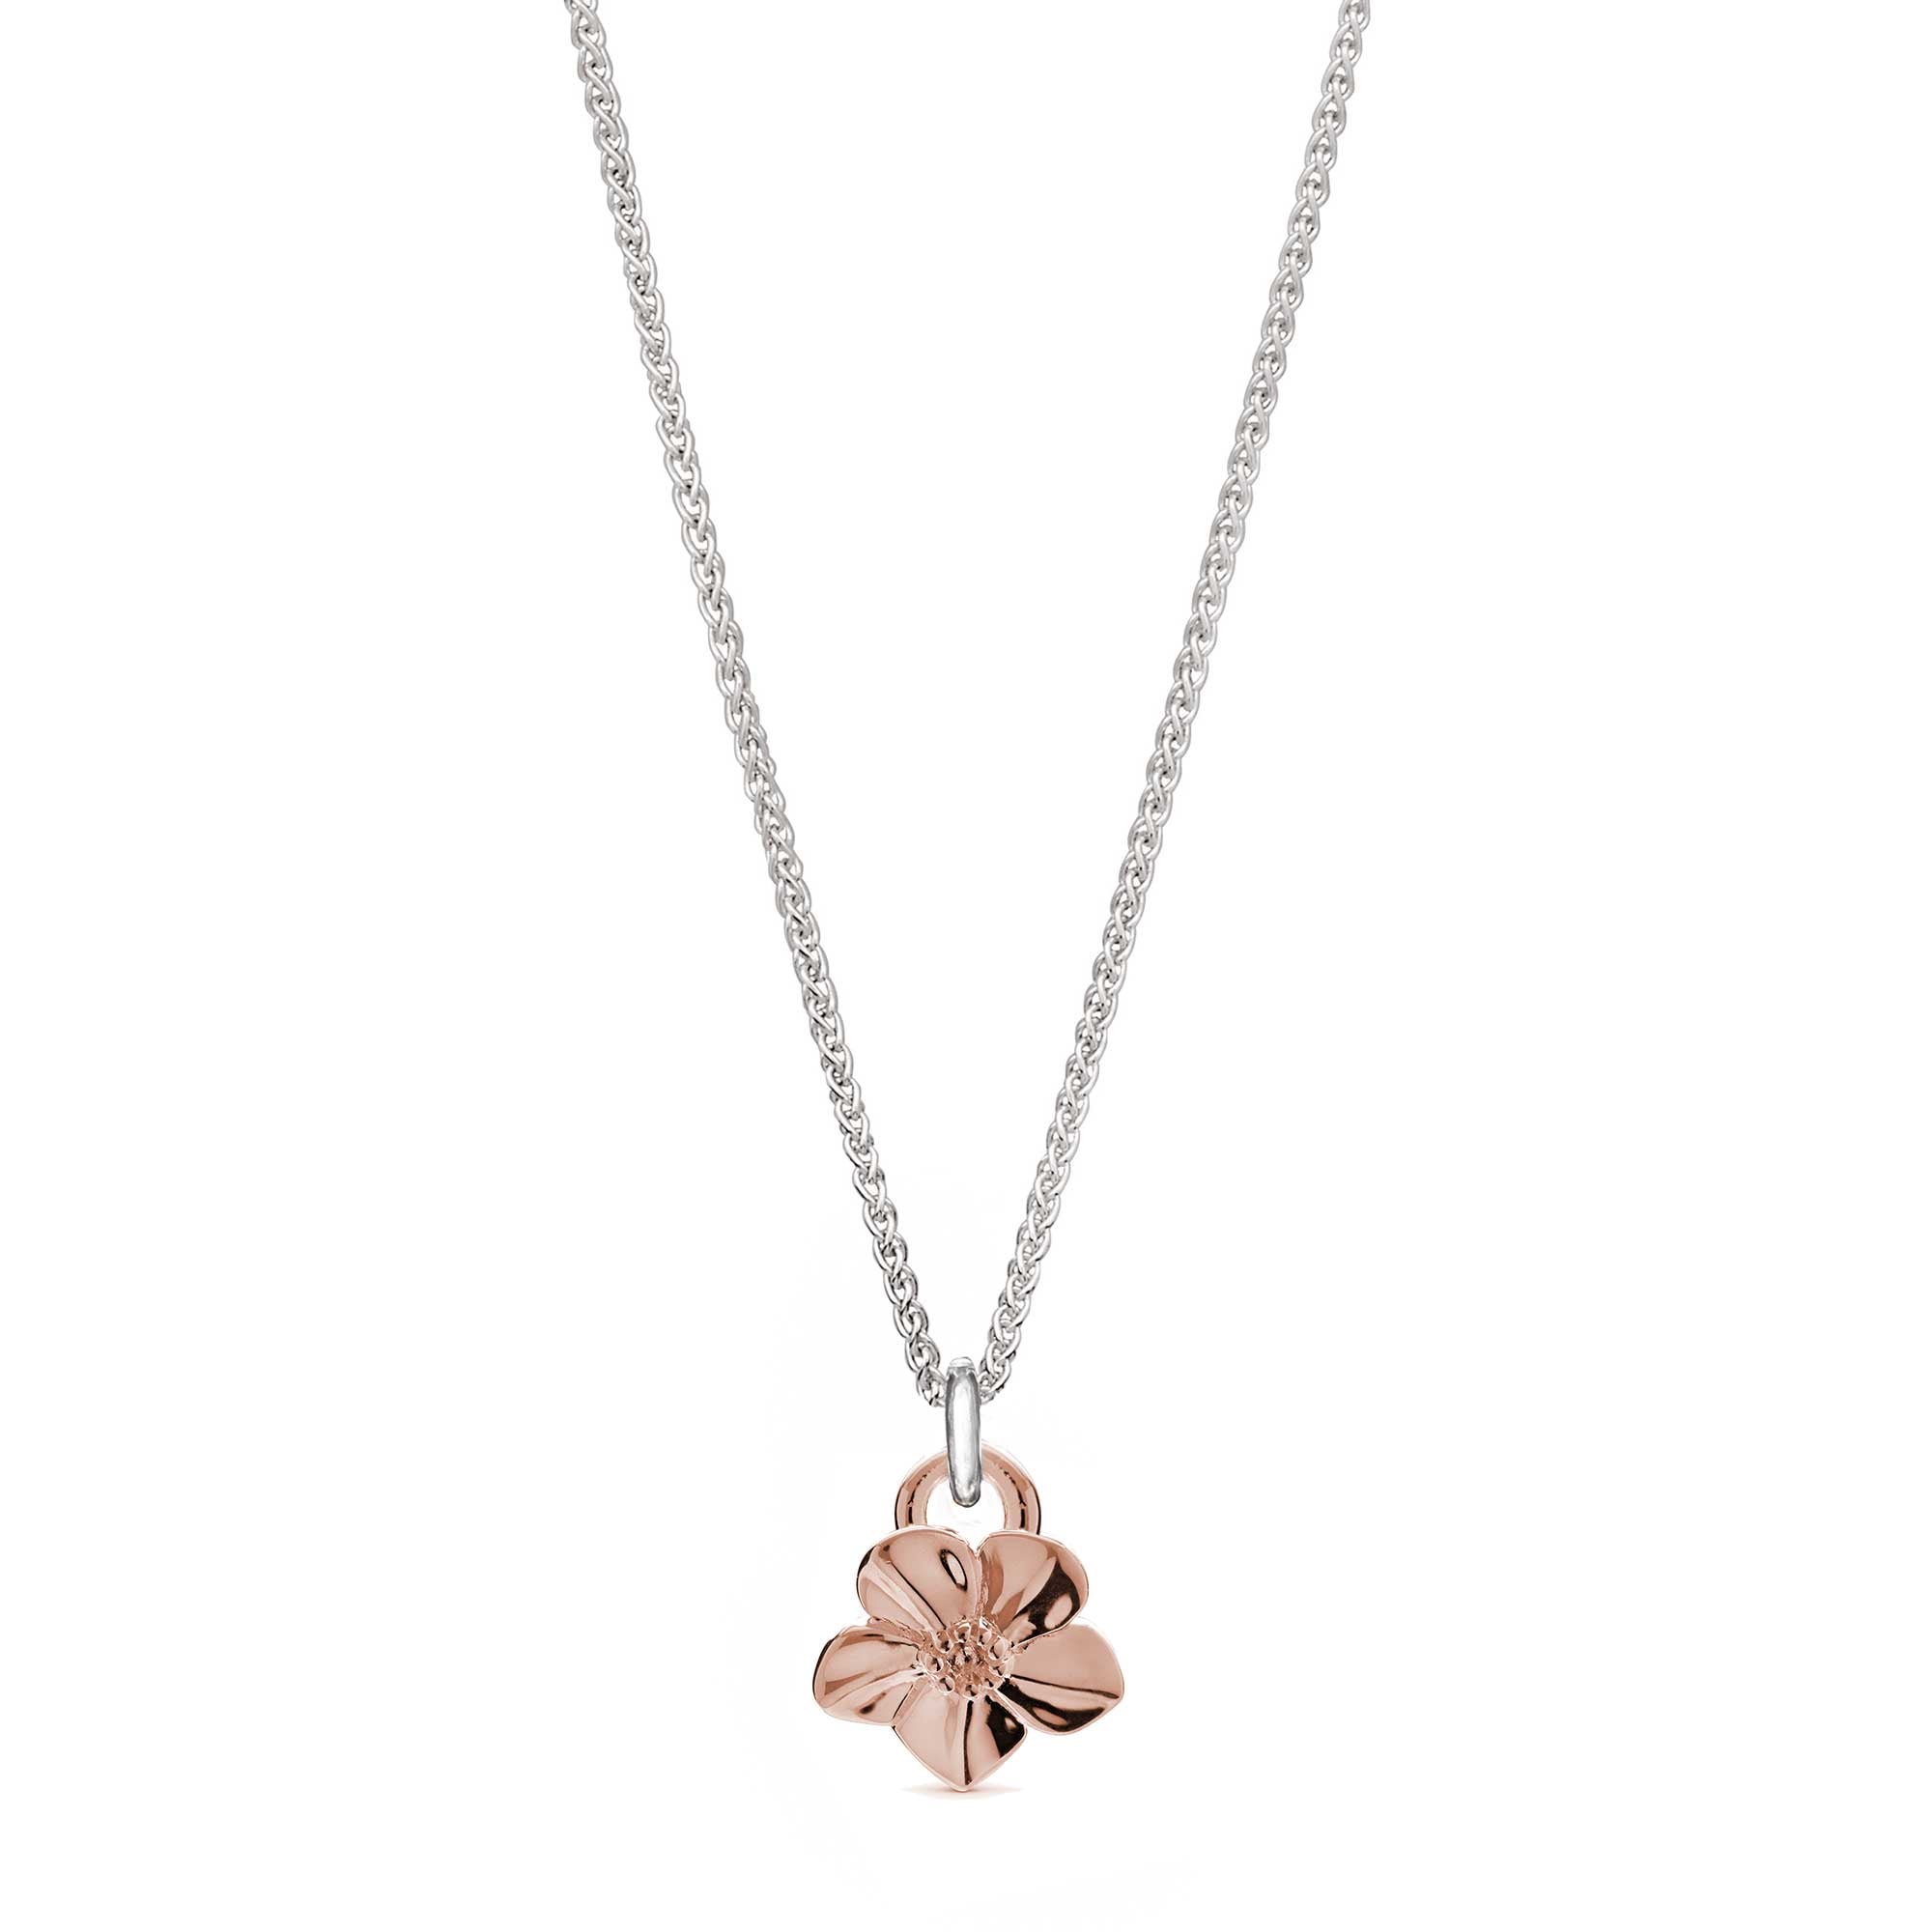 Solid rose gold forget-me-not flower necklace on silver chain designer Scarlett Jewellery Chelsea Flower Show